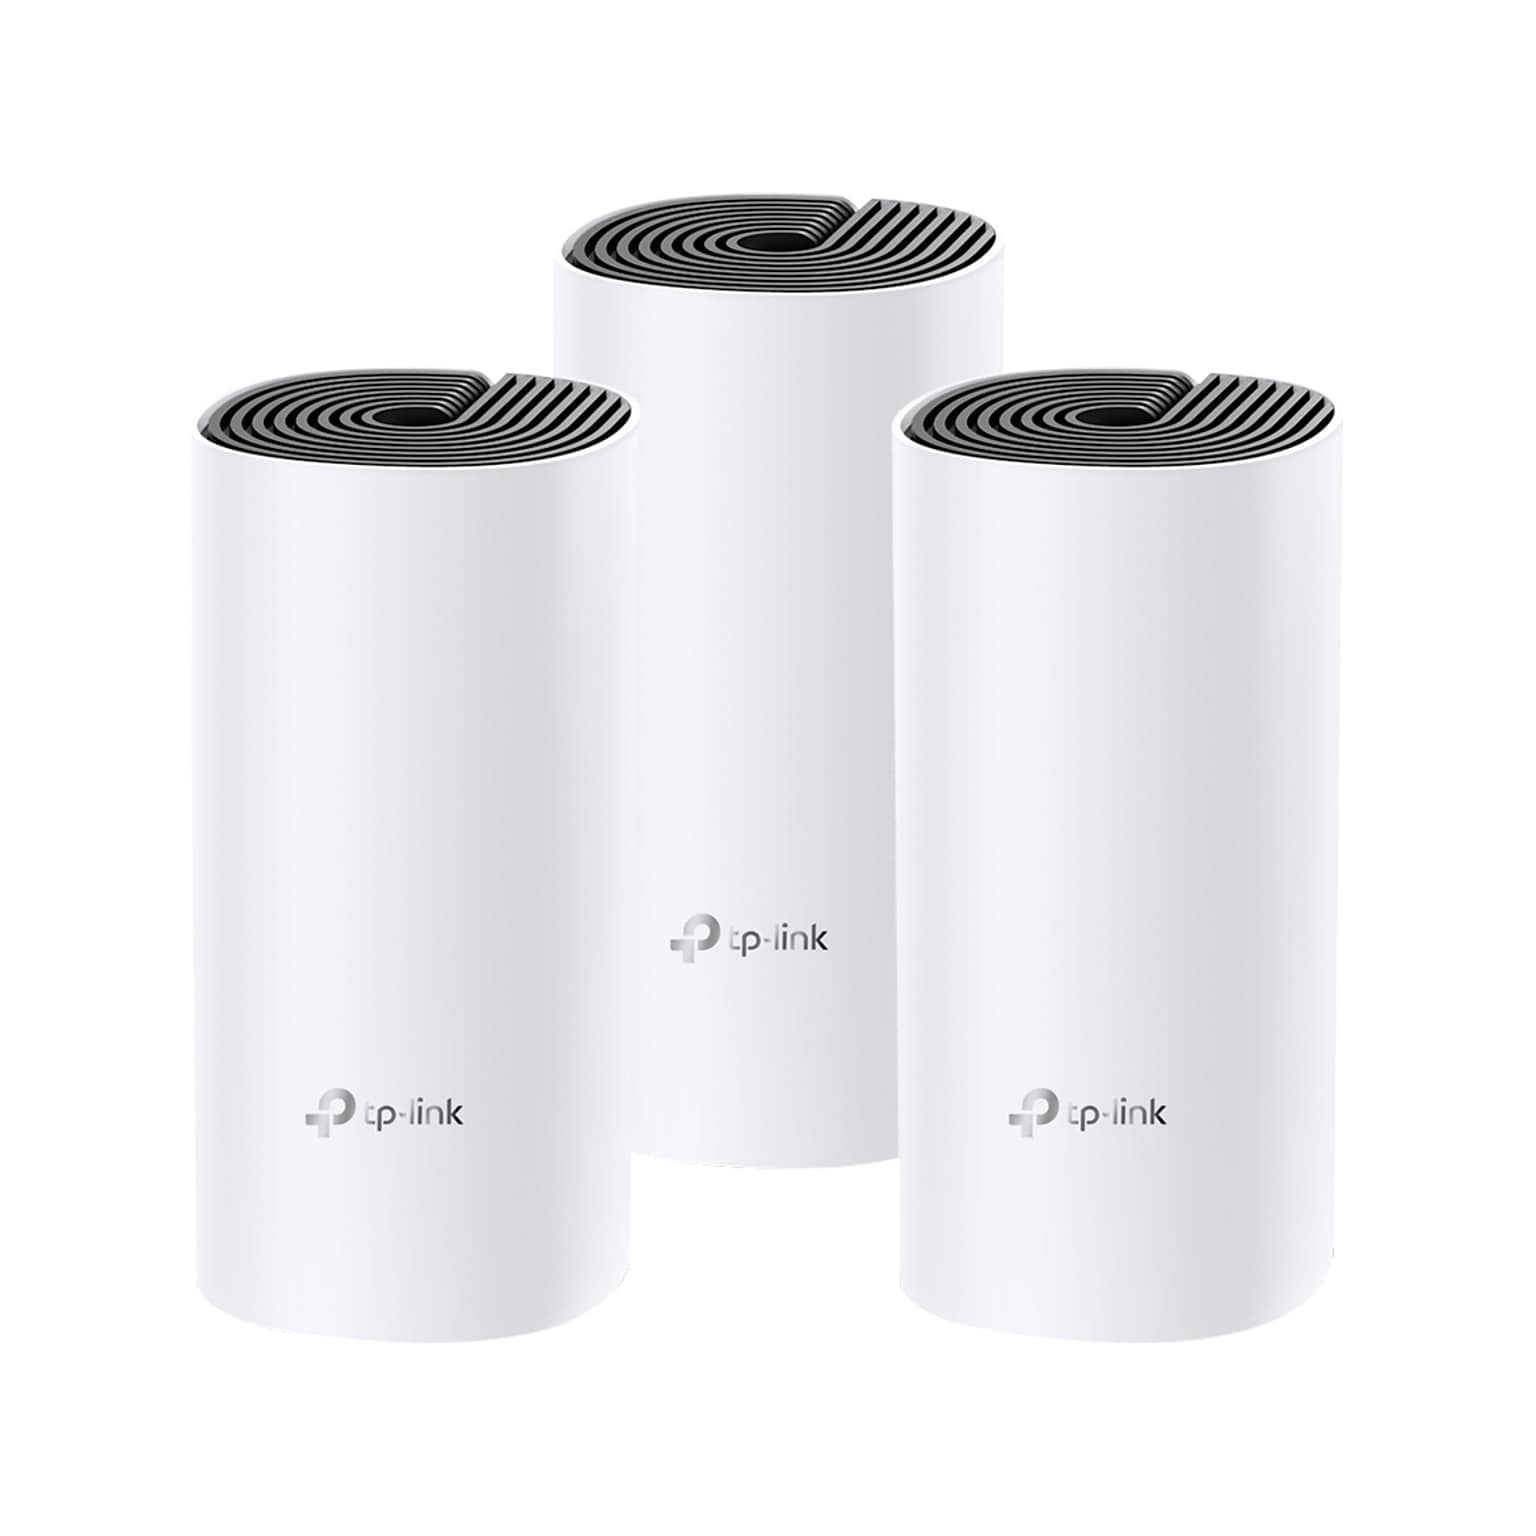 TP-LINK Deco M4 AC867 Dual Band Mesh WiFi 5 Router, White/Black, 3/Pack (DECO M4 3/Pack)